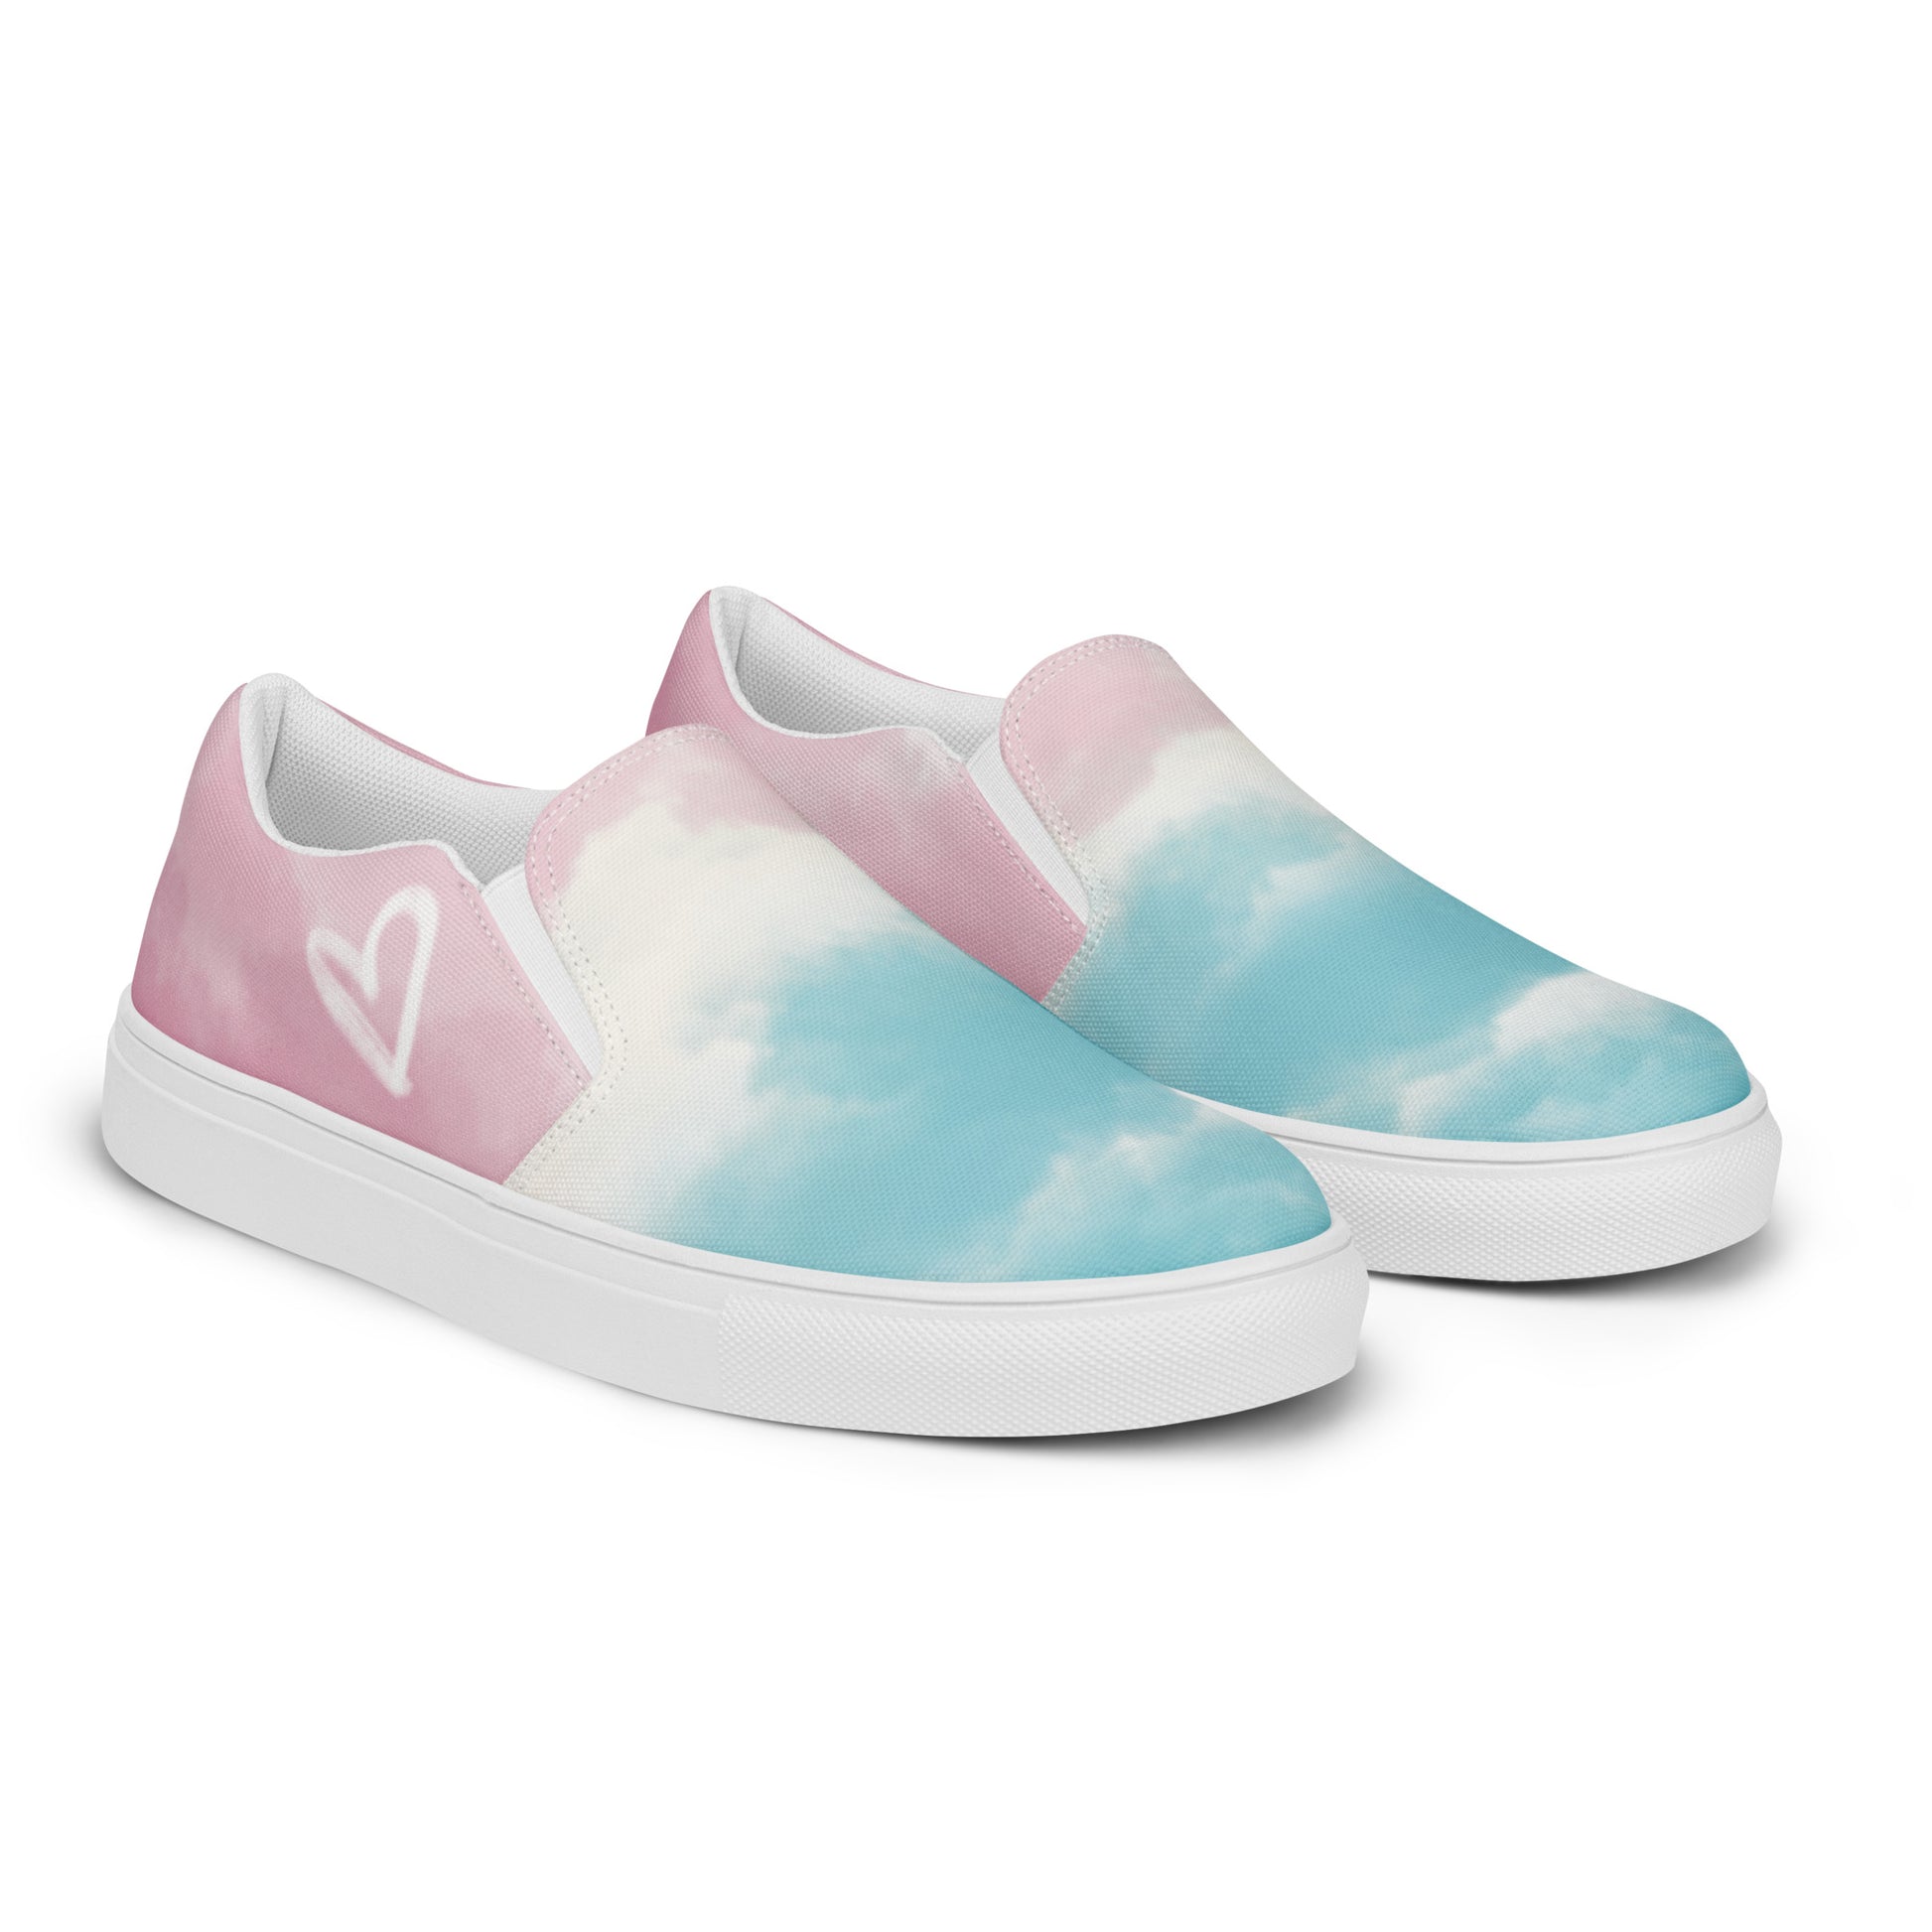 Right front view: A pair of slip on shoes has a cloud pattern with color blocked areas of blue, white, and pink, a white doodled heart on the outside, and the Aras Sivad Studio logo on the heel.